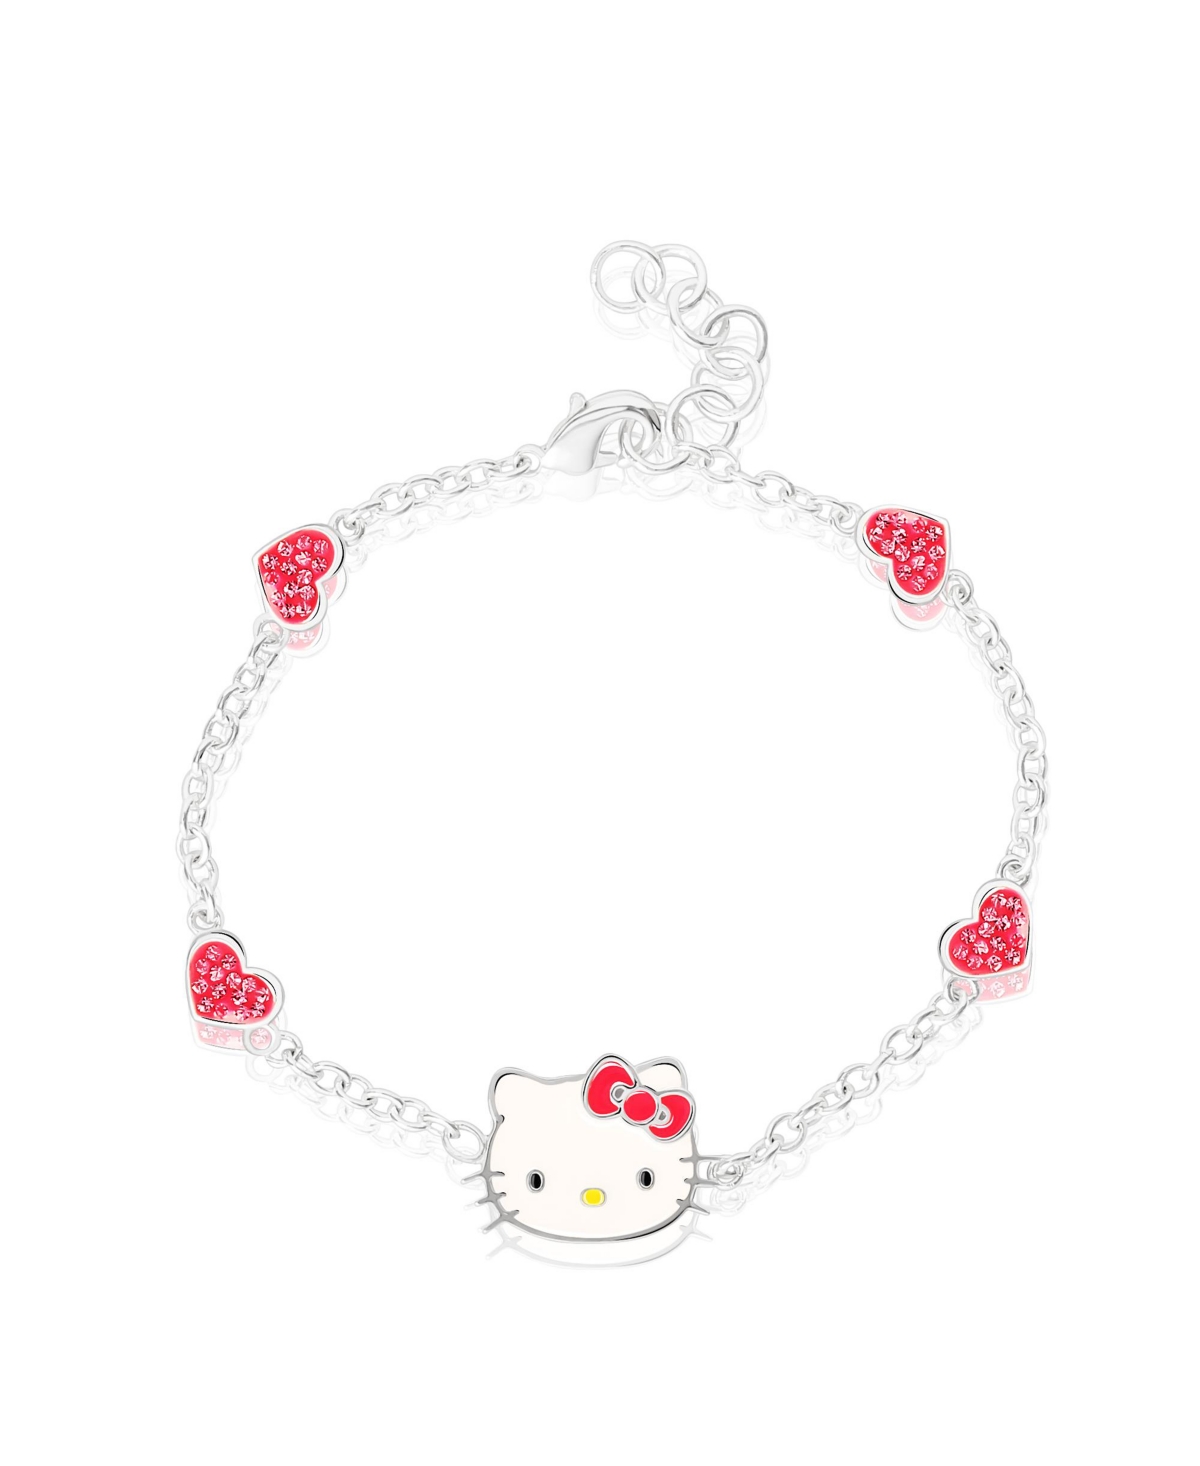 Sanrio Officially Licensed Authentic Silver Plated Bracelet with Stationed Crystals - 6.5 + 1" - Hearts